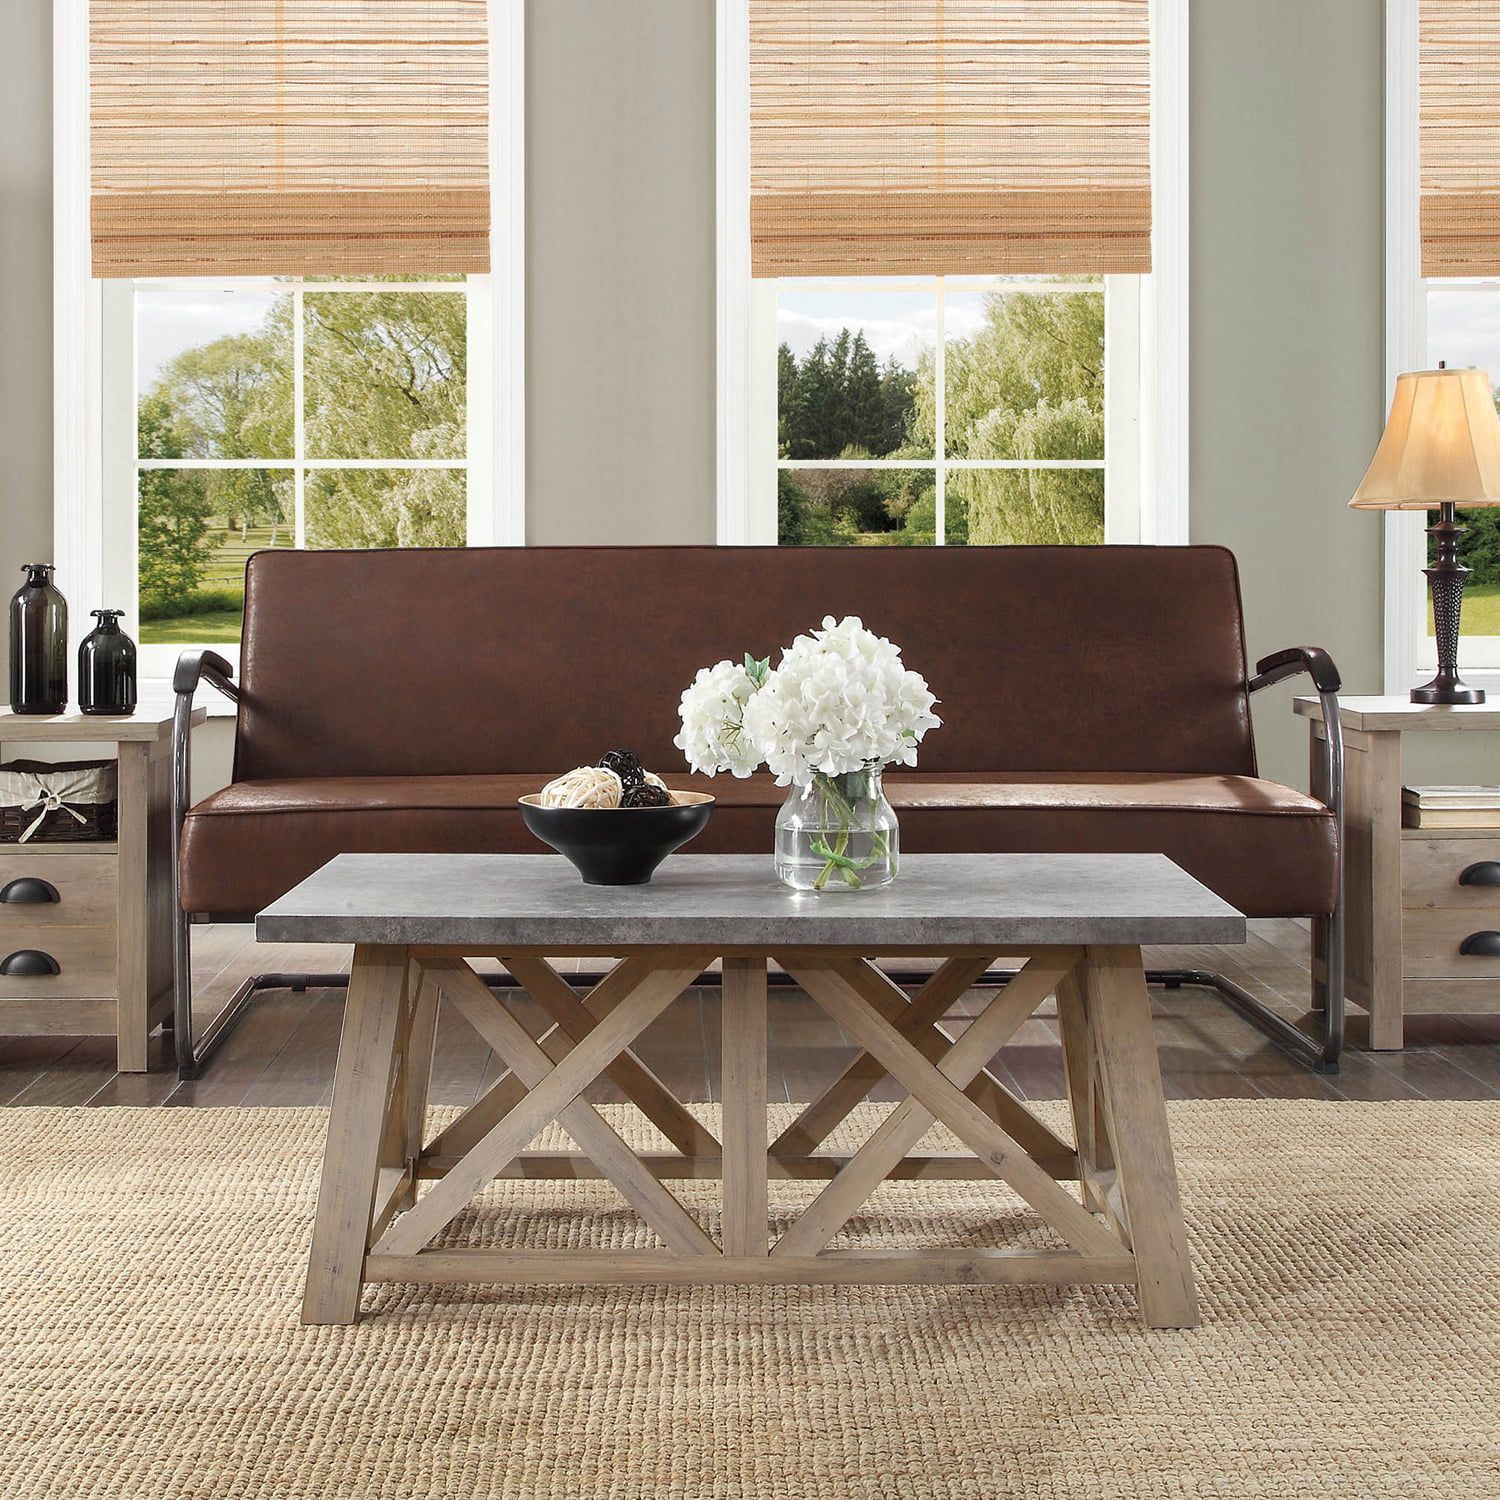 Better Homes & Gardens Granary Modern Farmhouse Coffee Table, Multiple With Modern Farmhouse Coffee Tables (View 3 of 15)